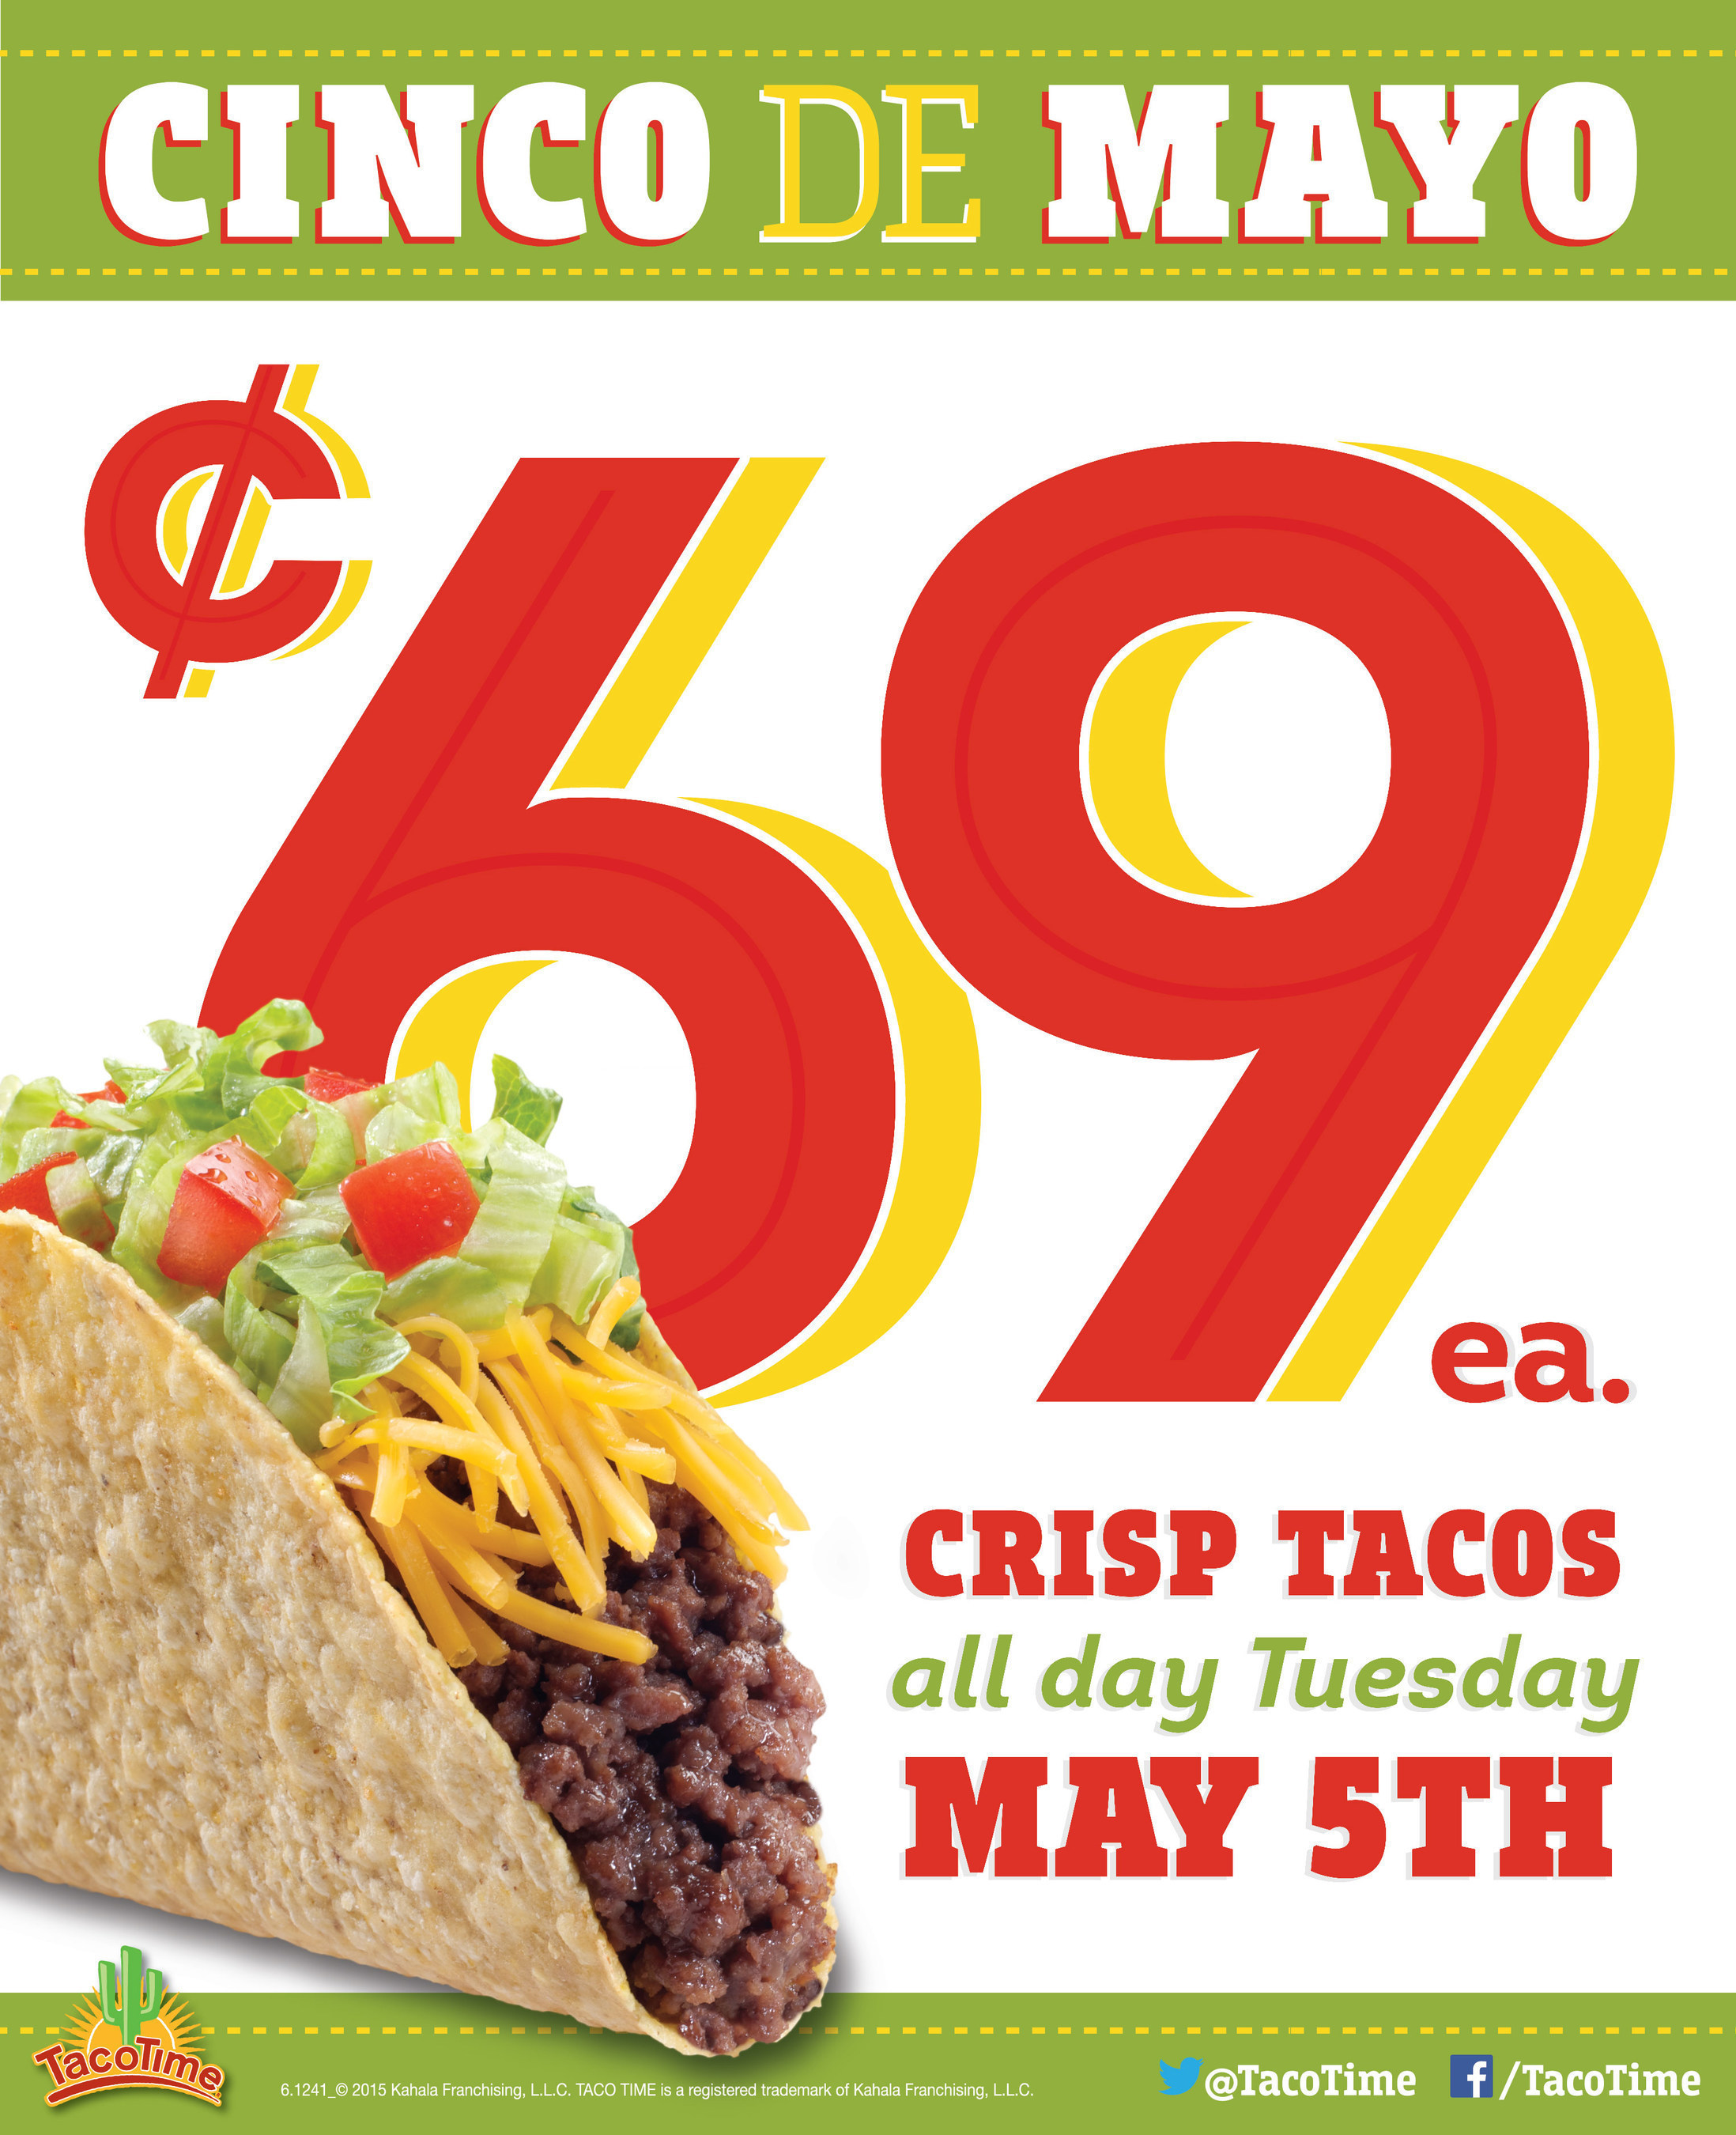 Celebrate Cinco de Mayo with TacoTime! Crisp Tacos are only $.69 all day May 5th.